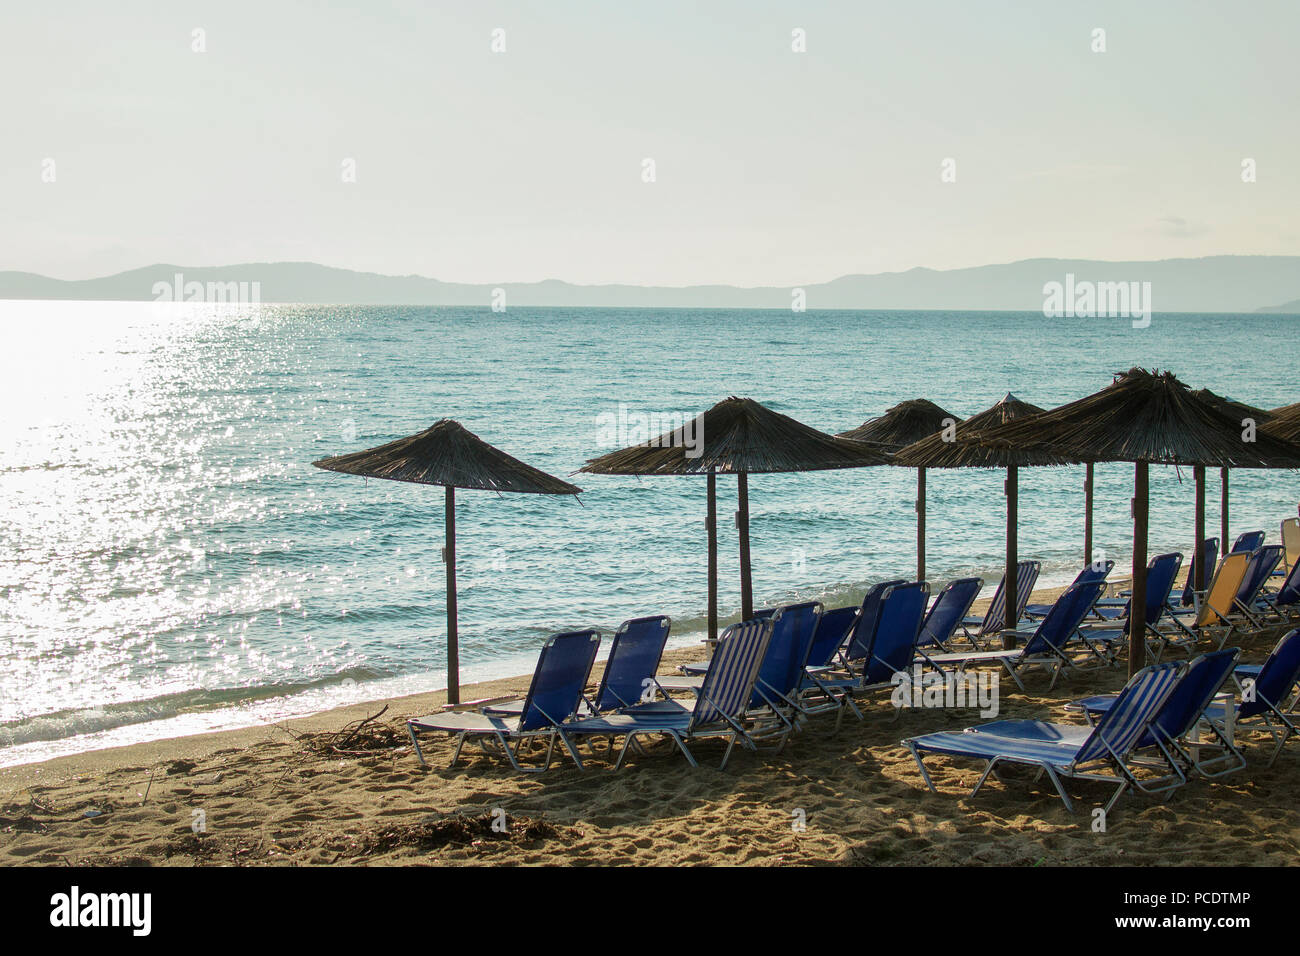 Morning at a beach with loungers under palm tree leaves umbrellas. Ierissos, Greece. Stock Photo